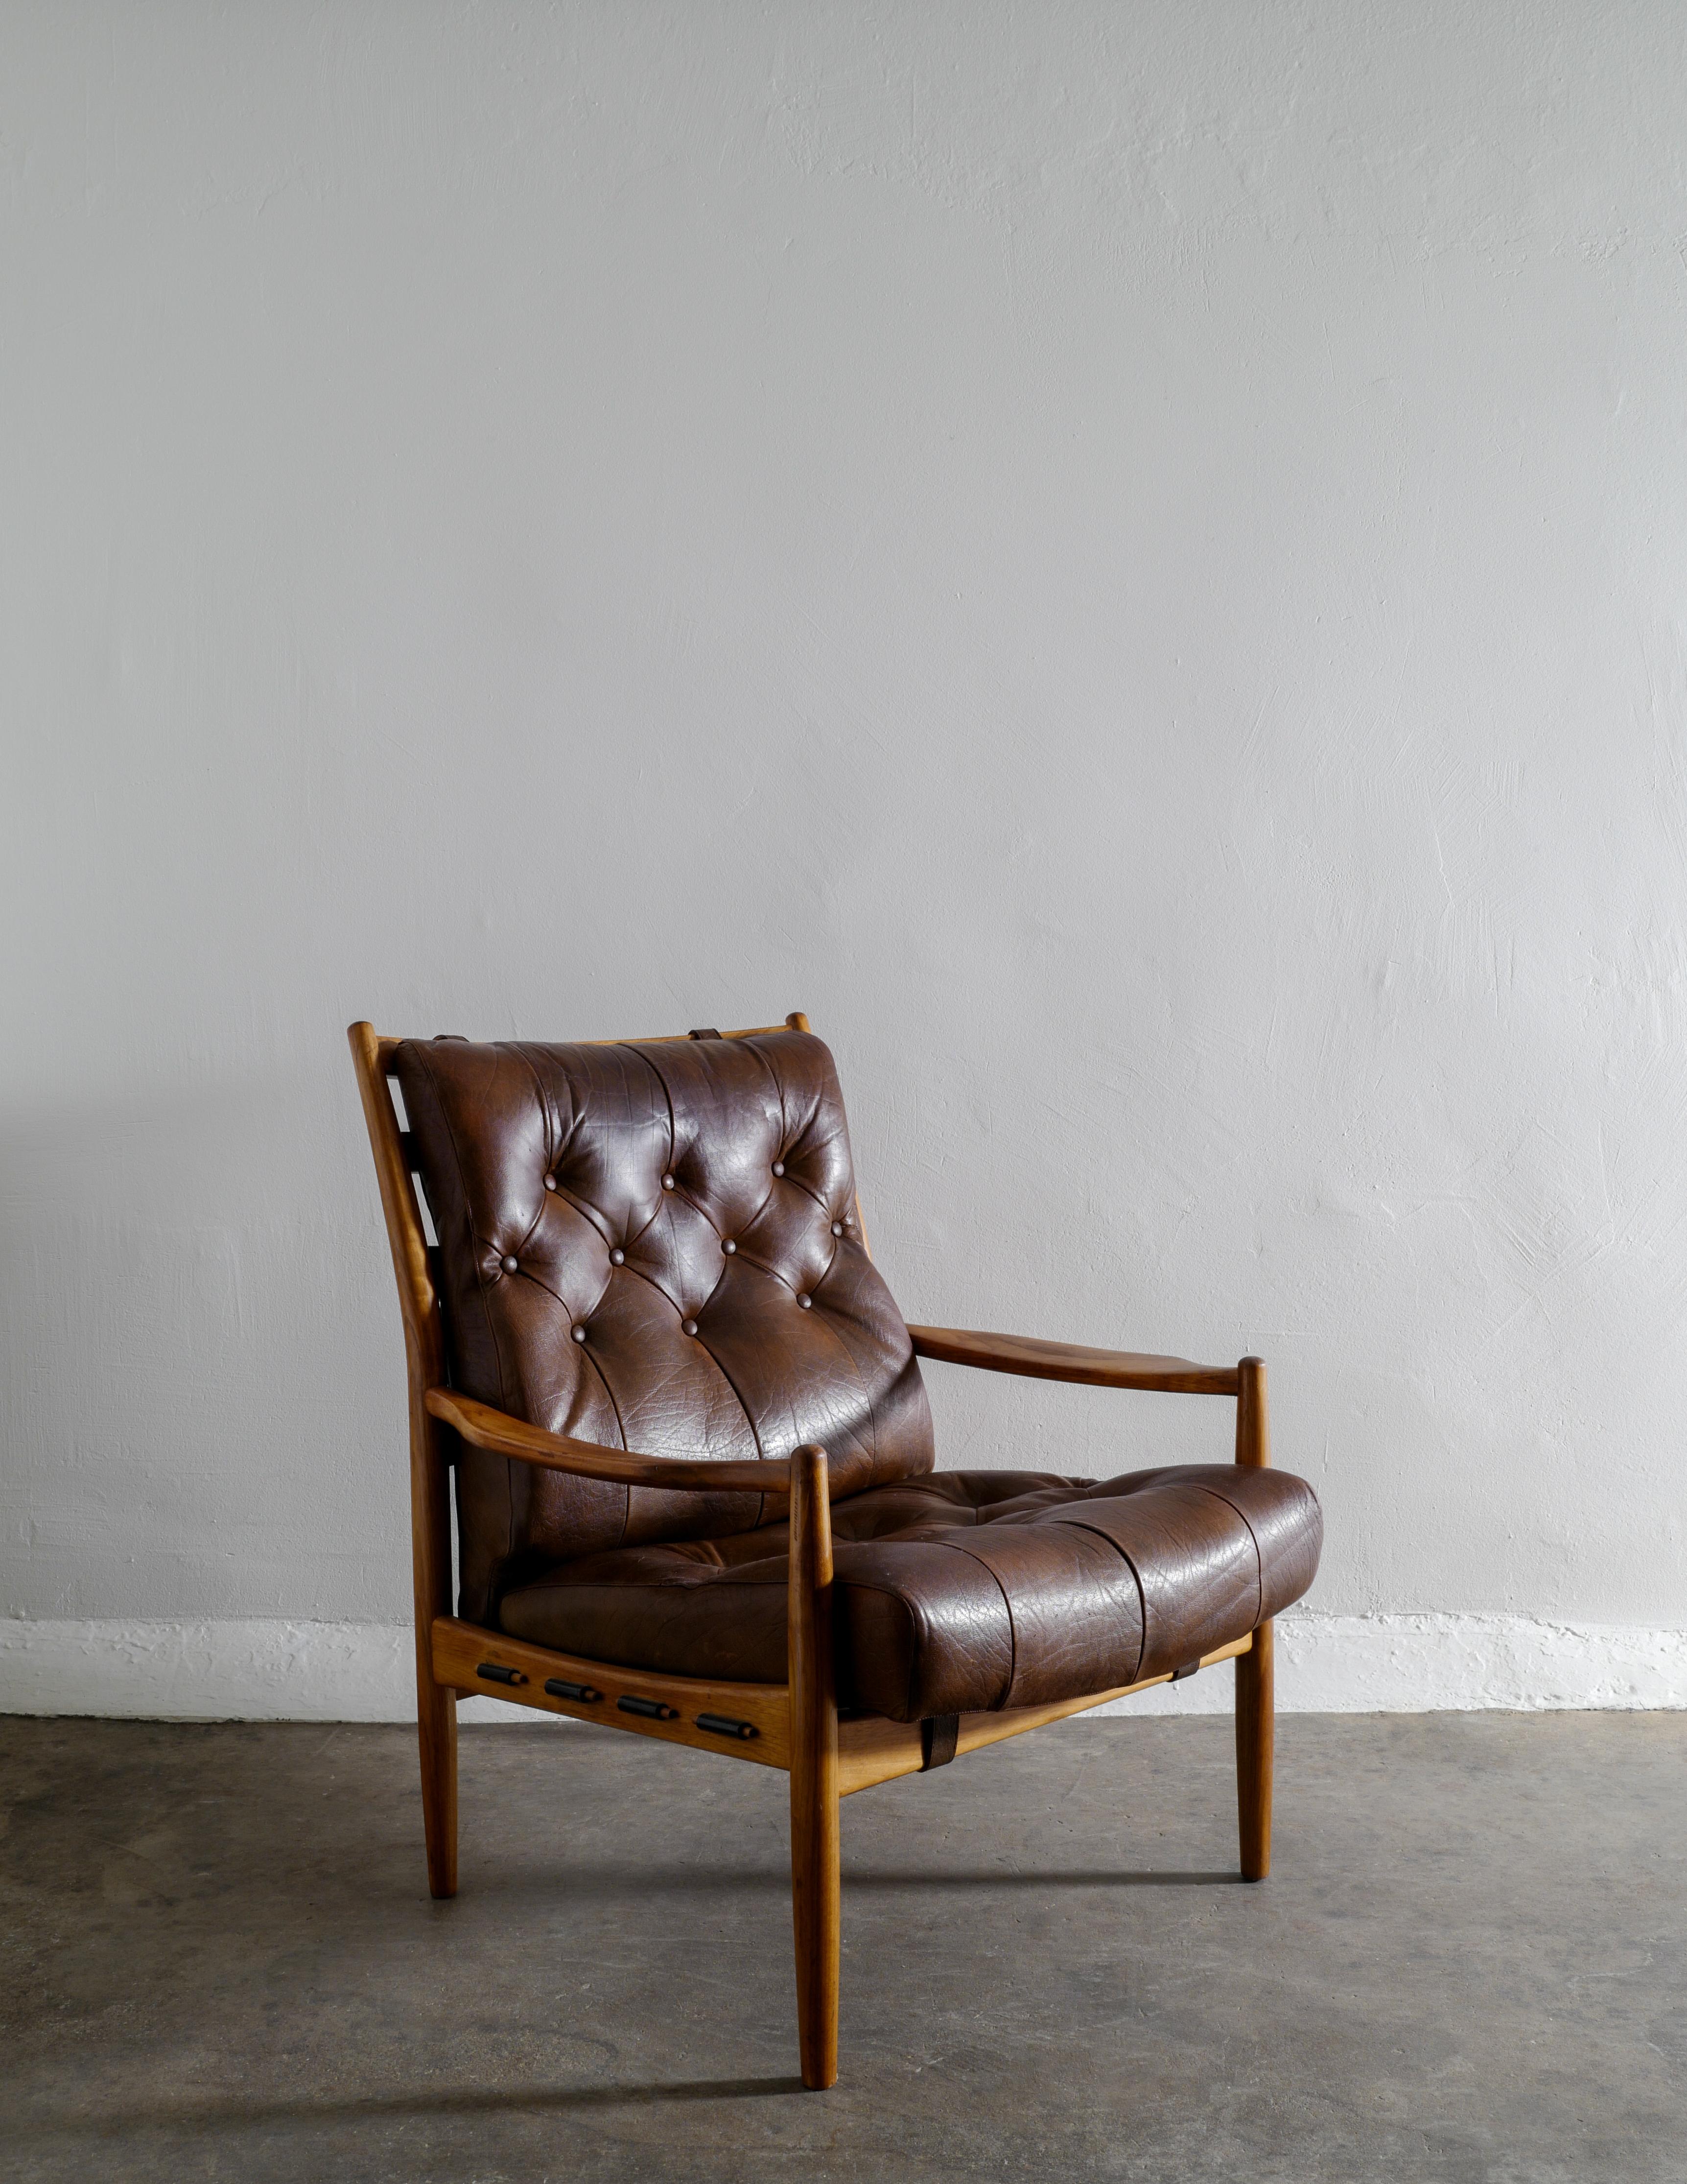 Swedish Leather Arm Easychair by Ingemar Thillmark Produced by OPE Möbler, Sweden, 1960s